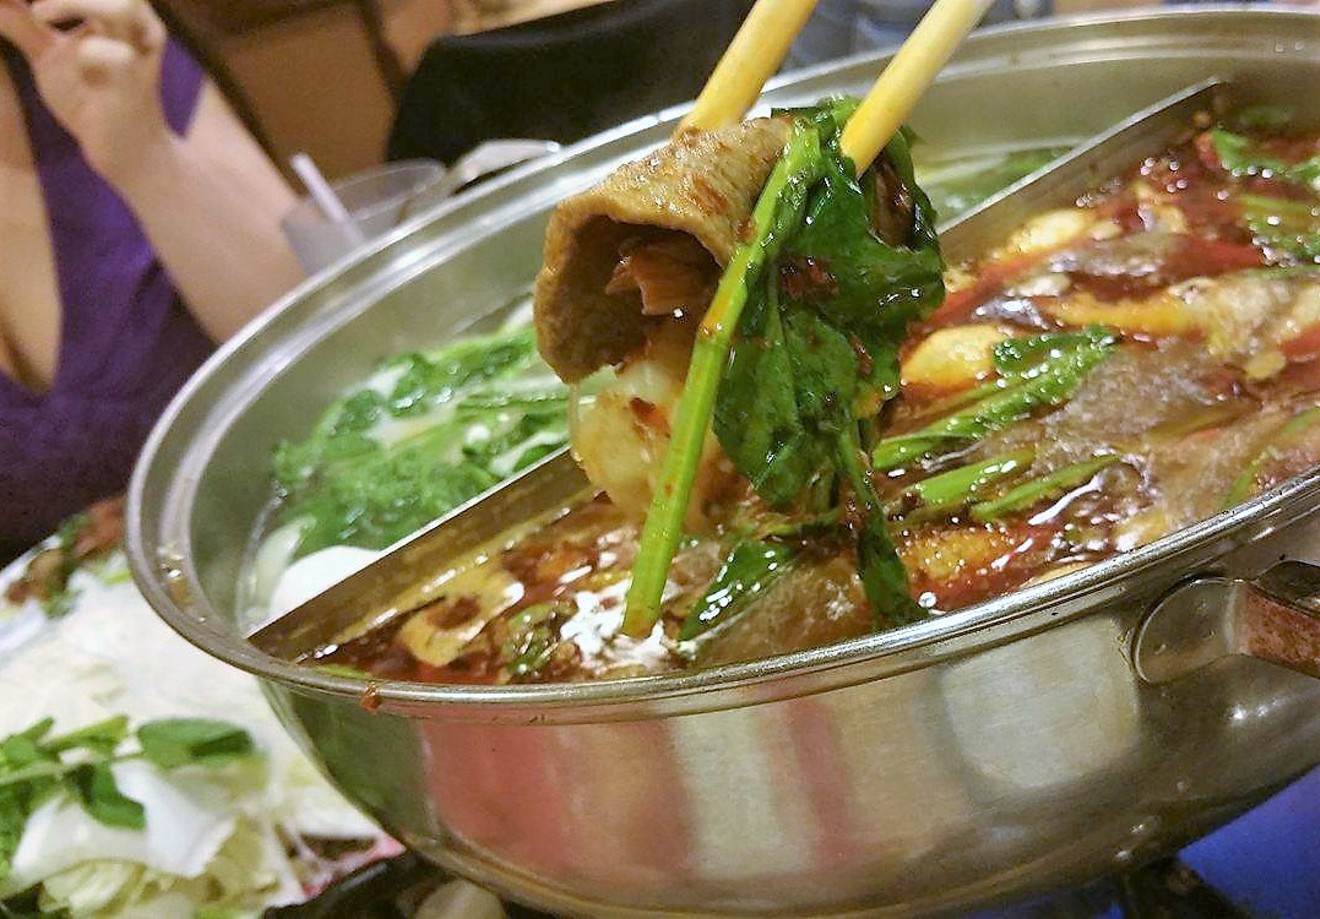 Meat, seafood and vegetables are dipped into a flavorful broth to cook tableside, similar to fondue cooking.